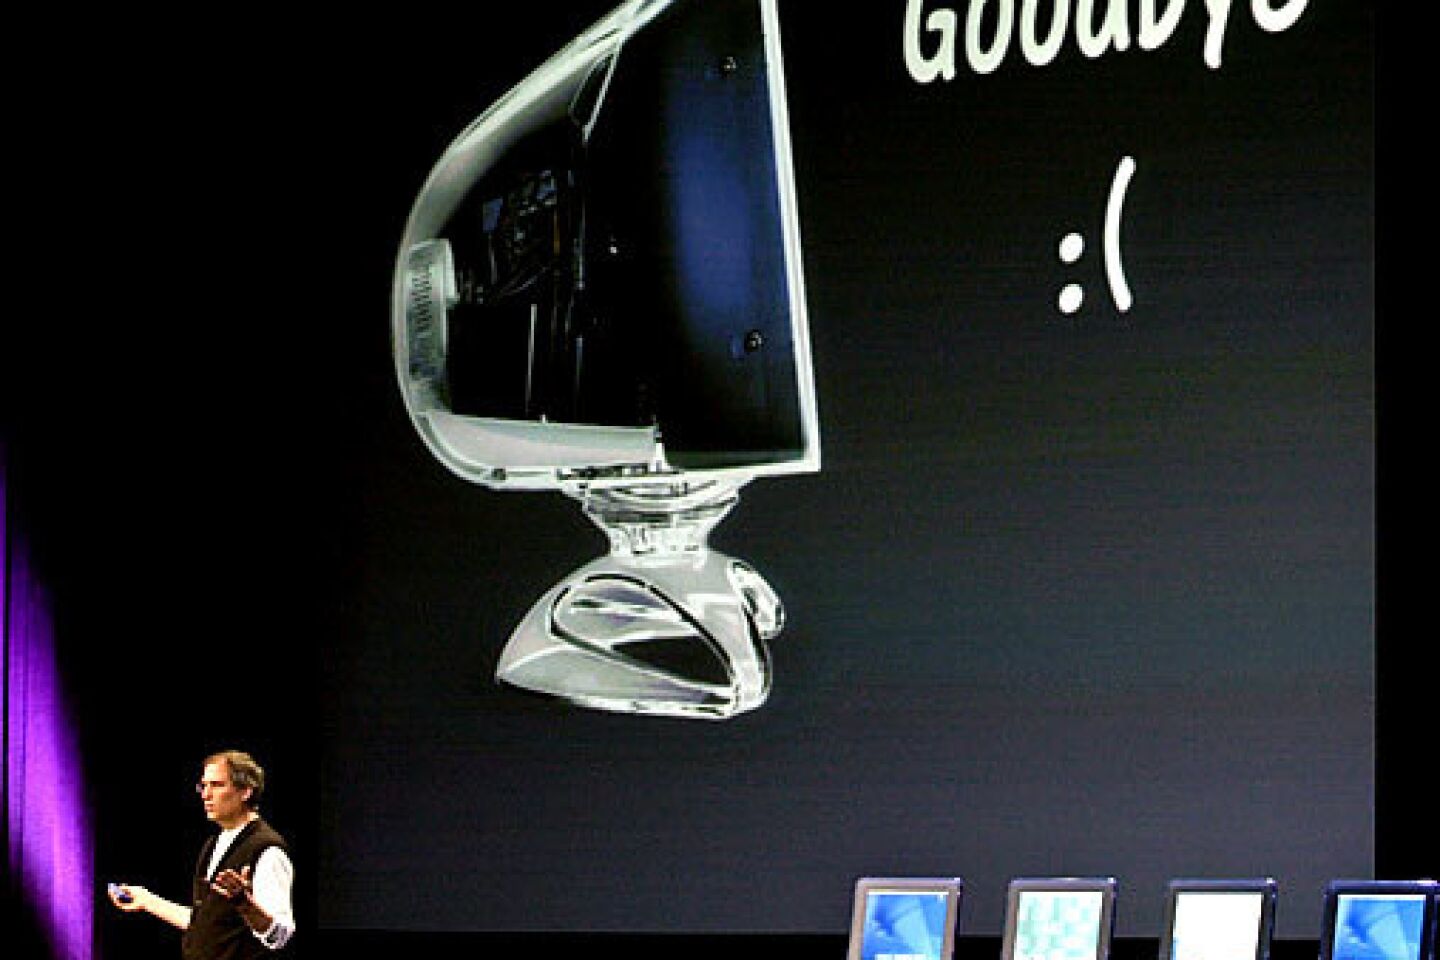 Apple will stop producing cathode ray tube displays, Jobs announces during the Apple Developers Conference in San Jose. He said Apple would be the first major computer company to produce all LCD displays.